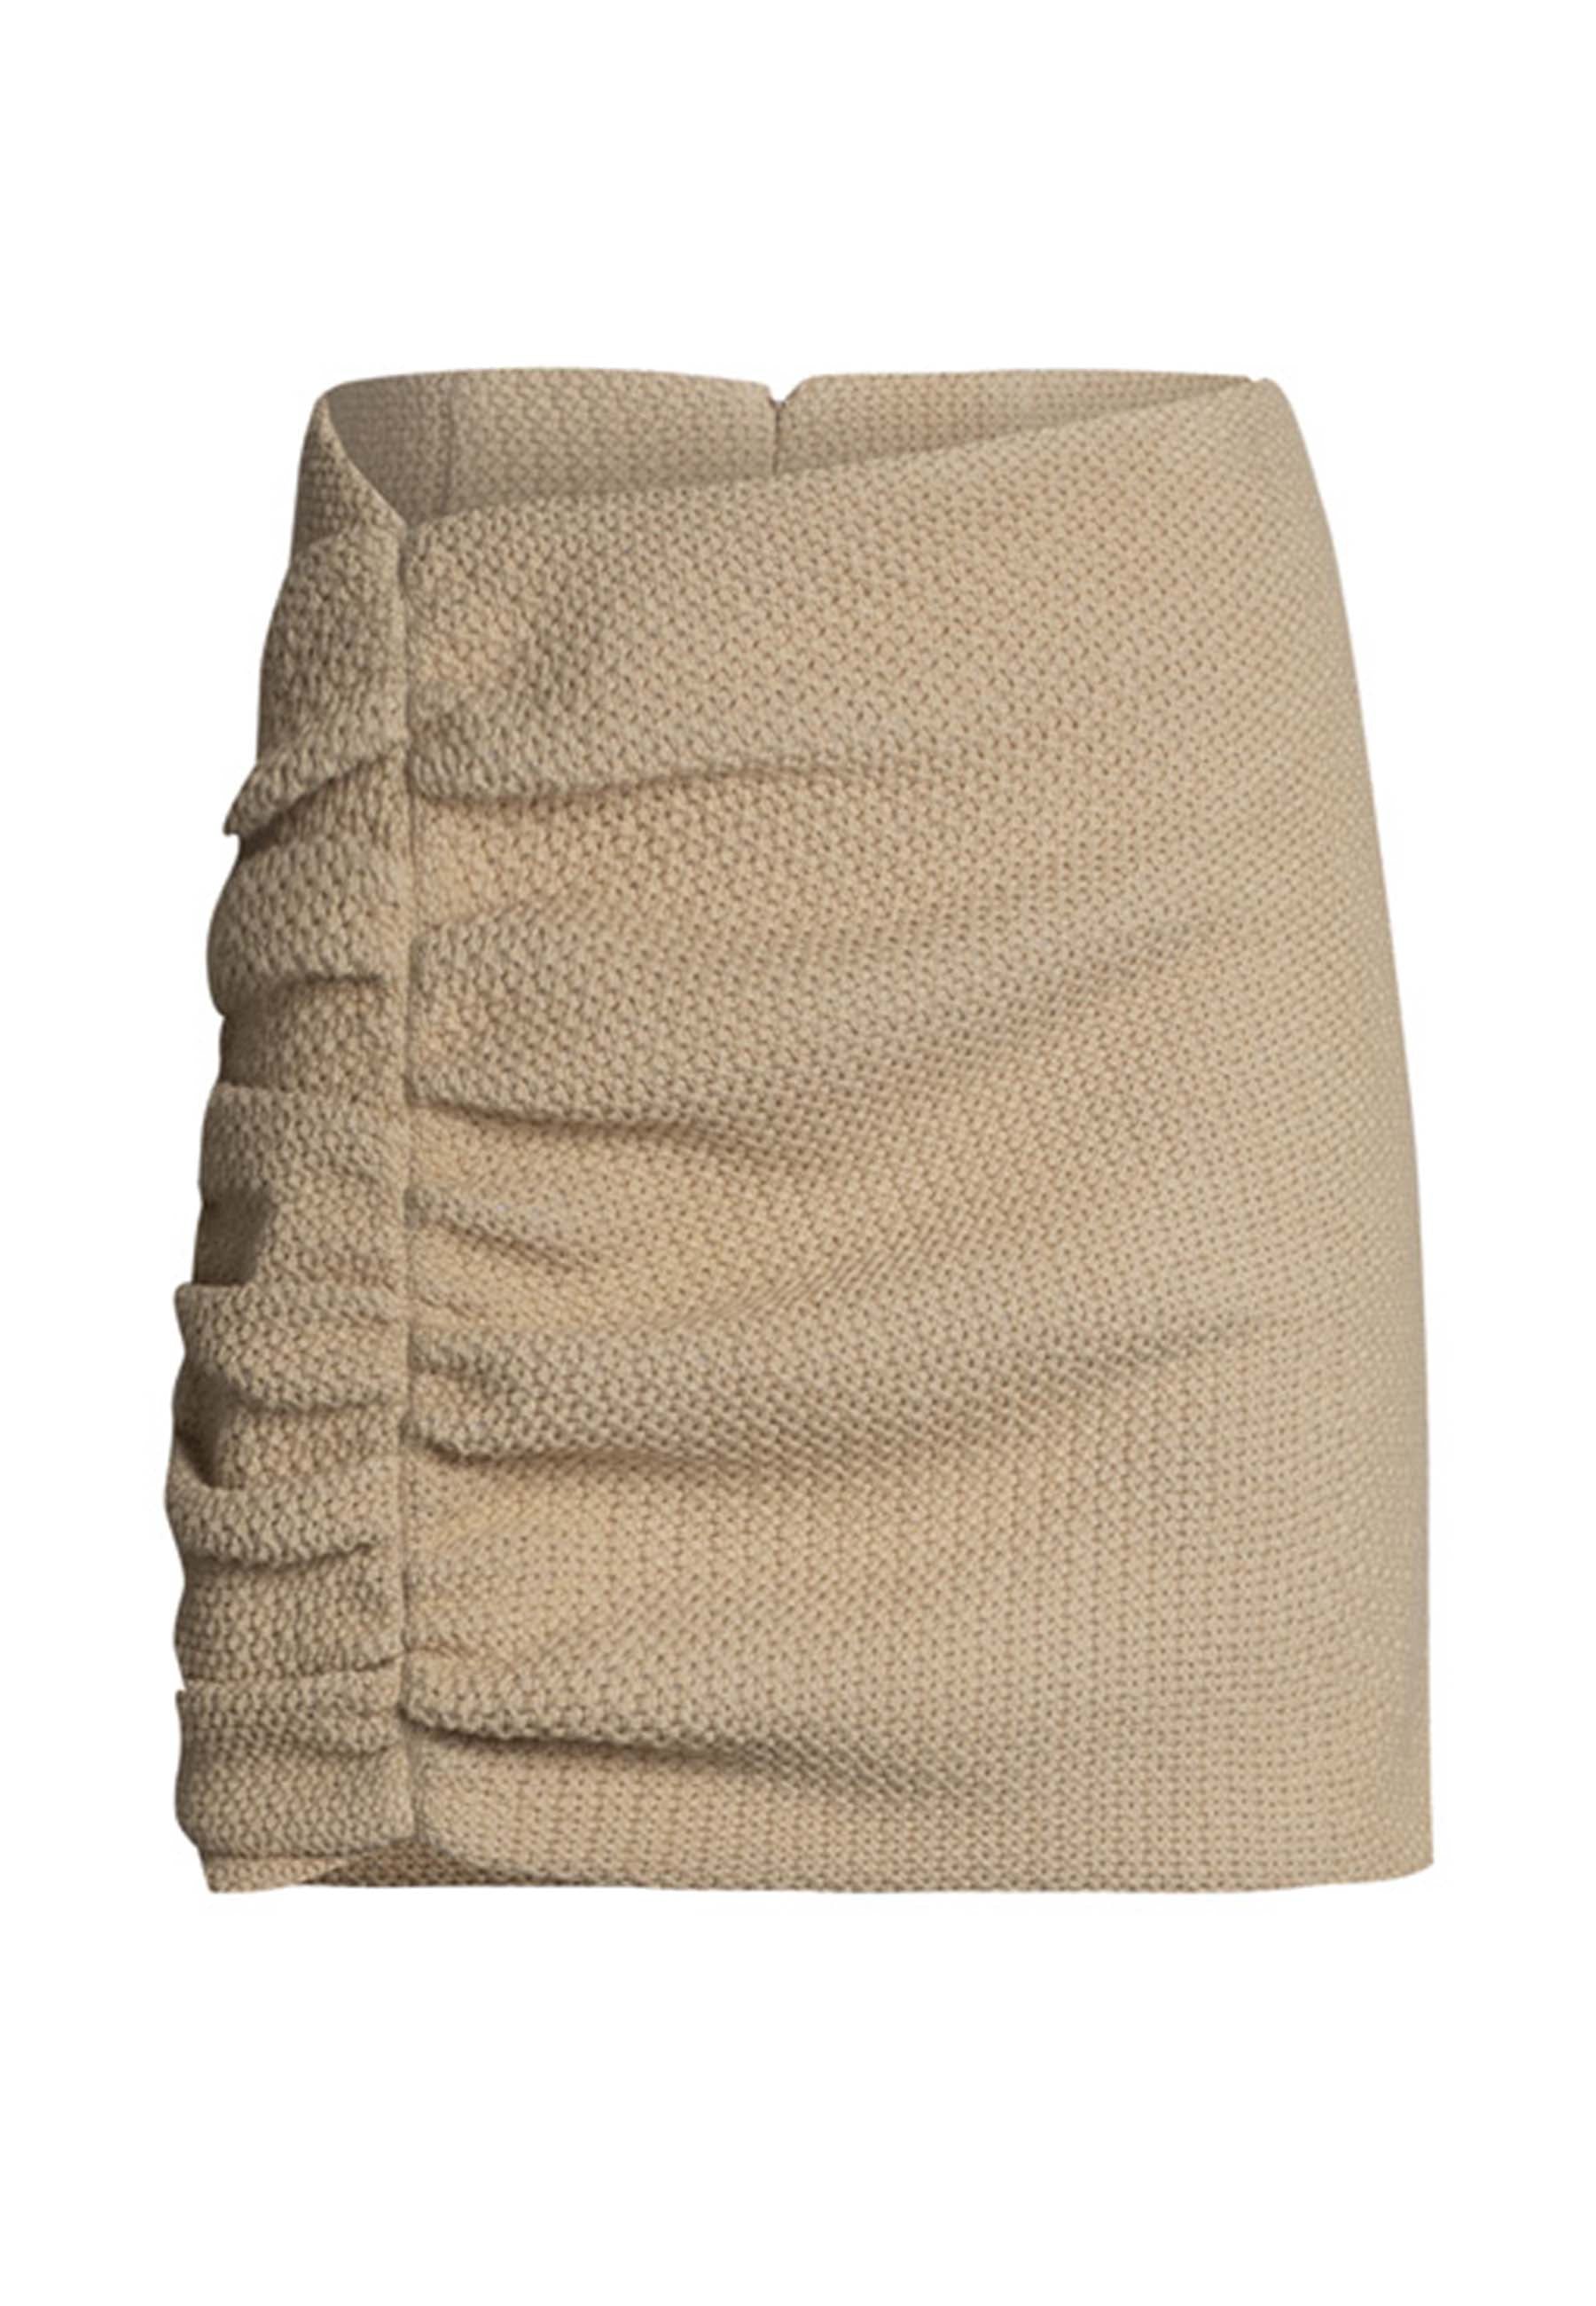 Women's beige cotton mini skirt with side gathering